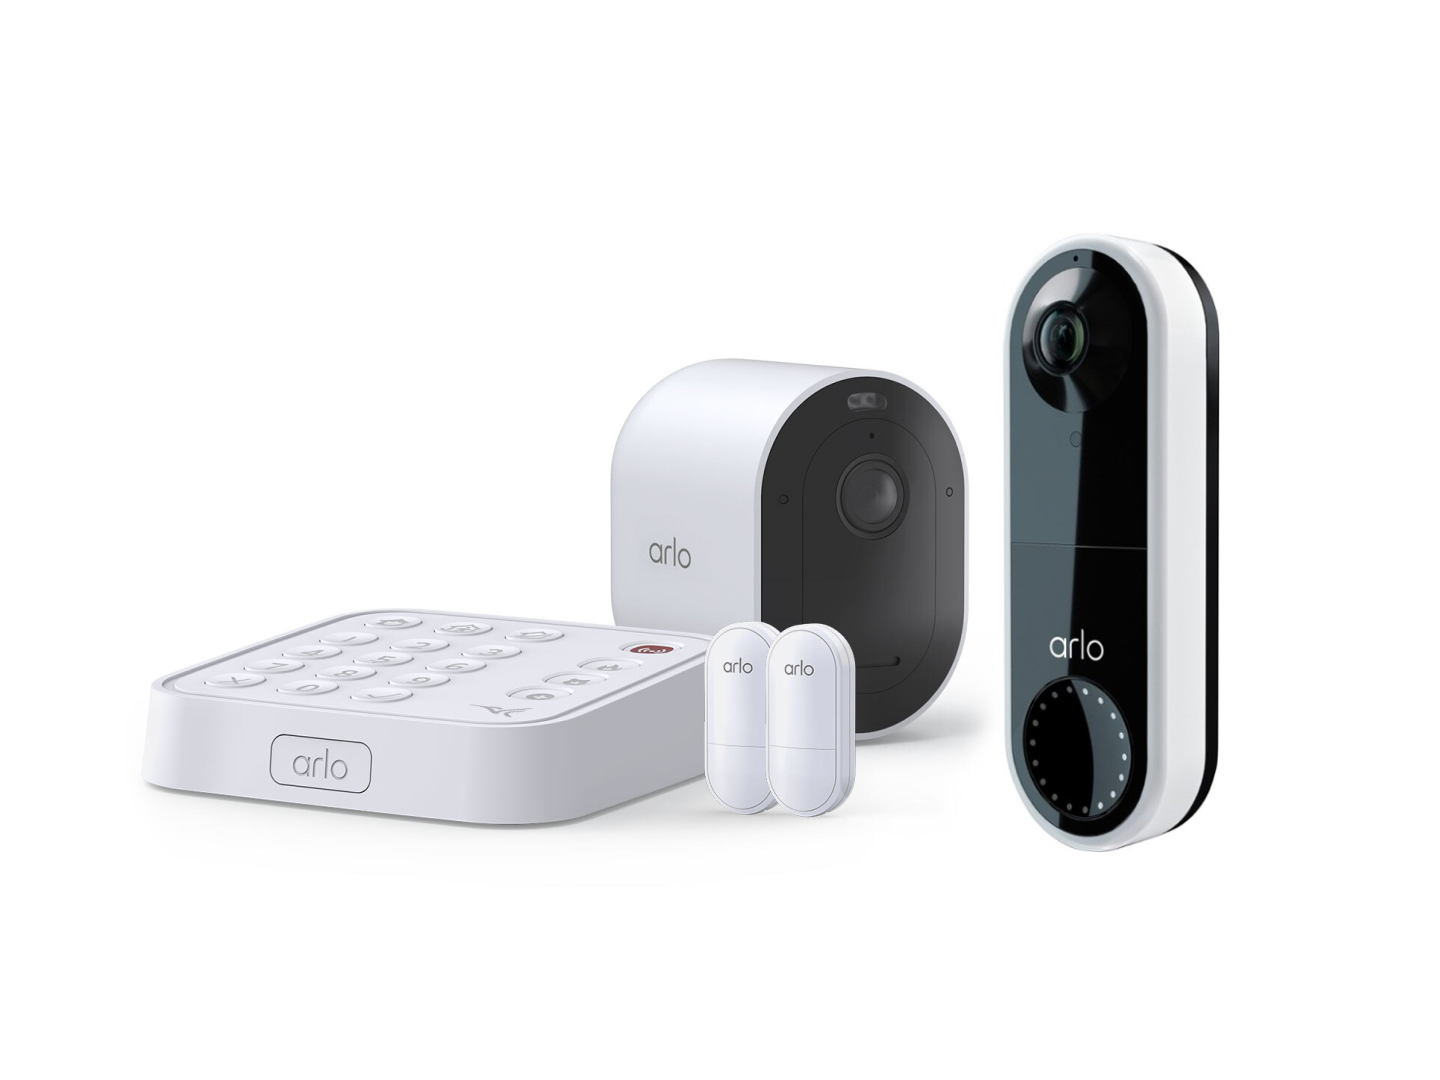 Arlo security camera, security system, and doorbell